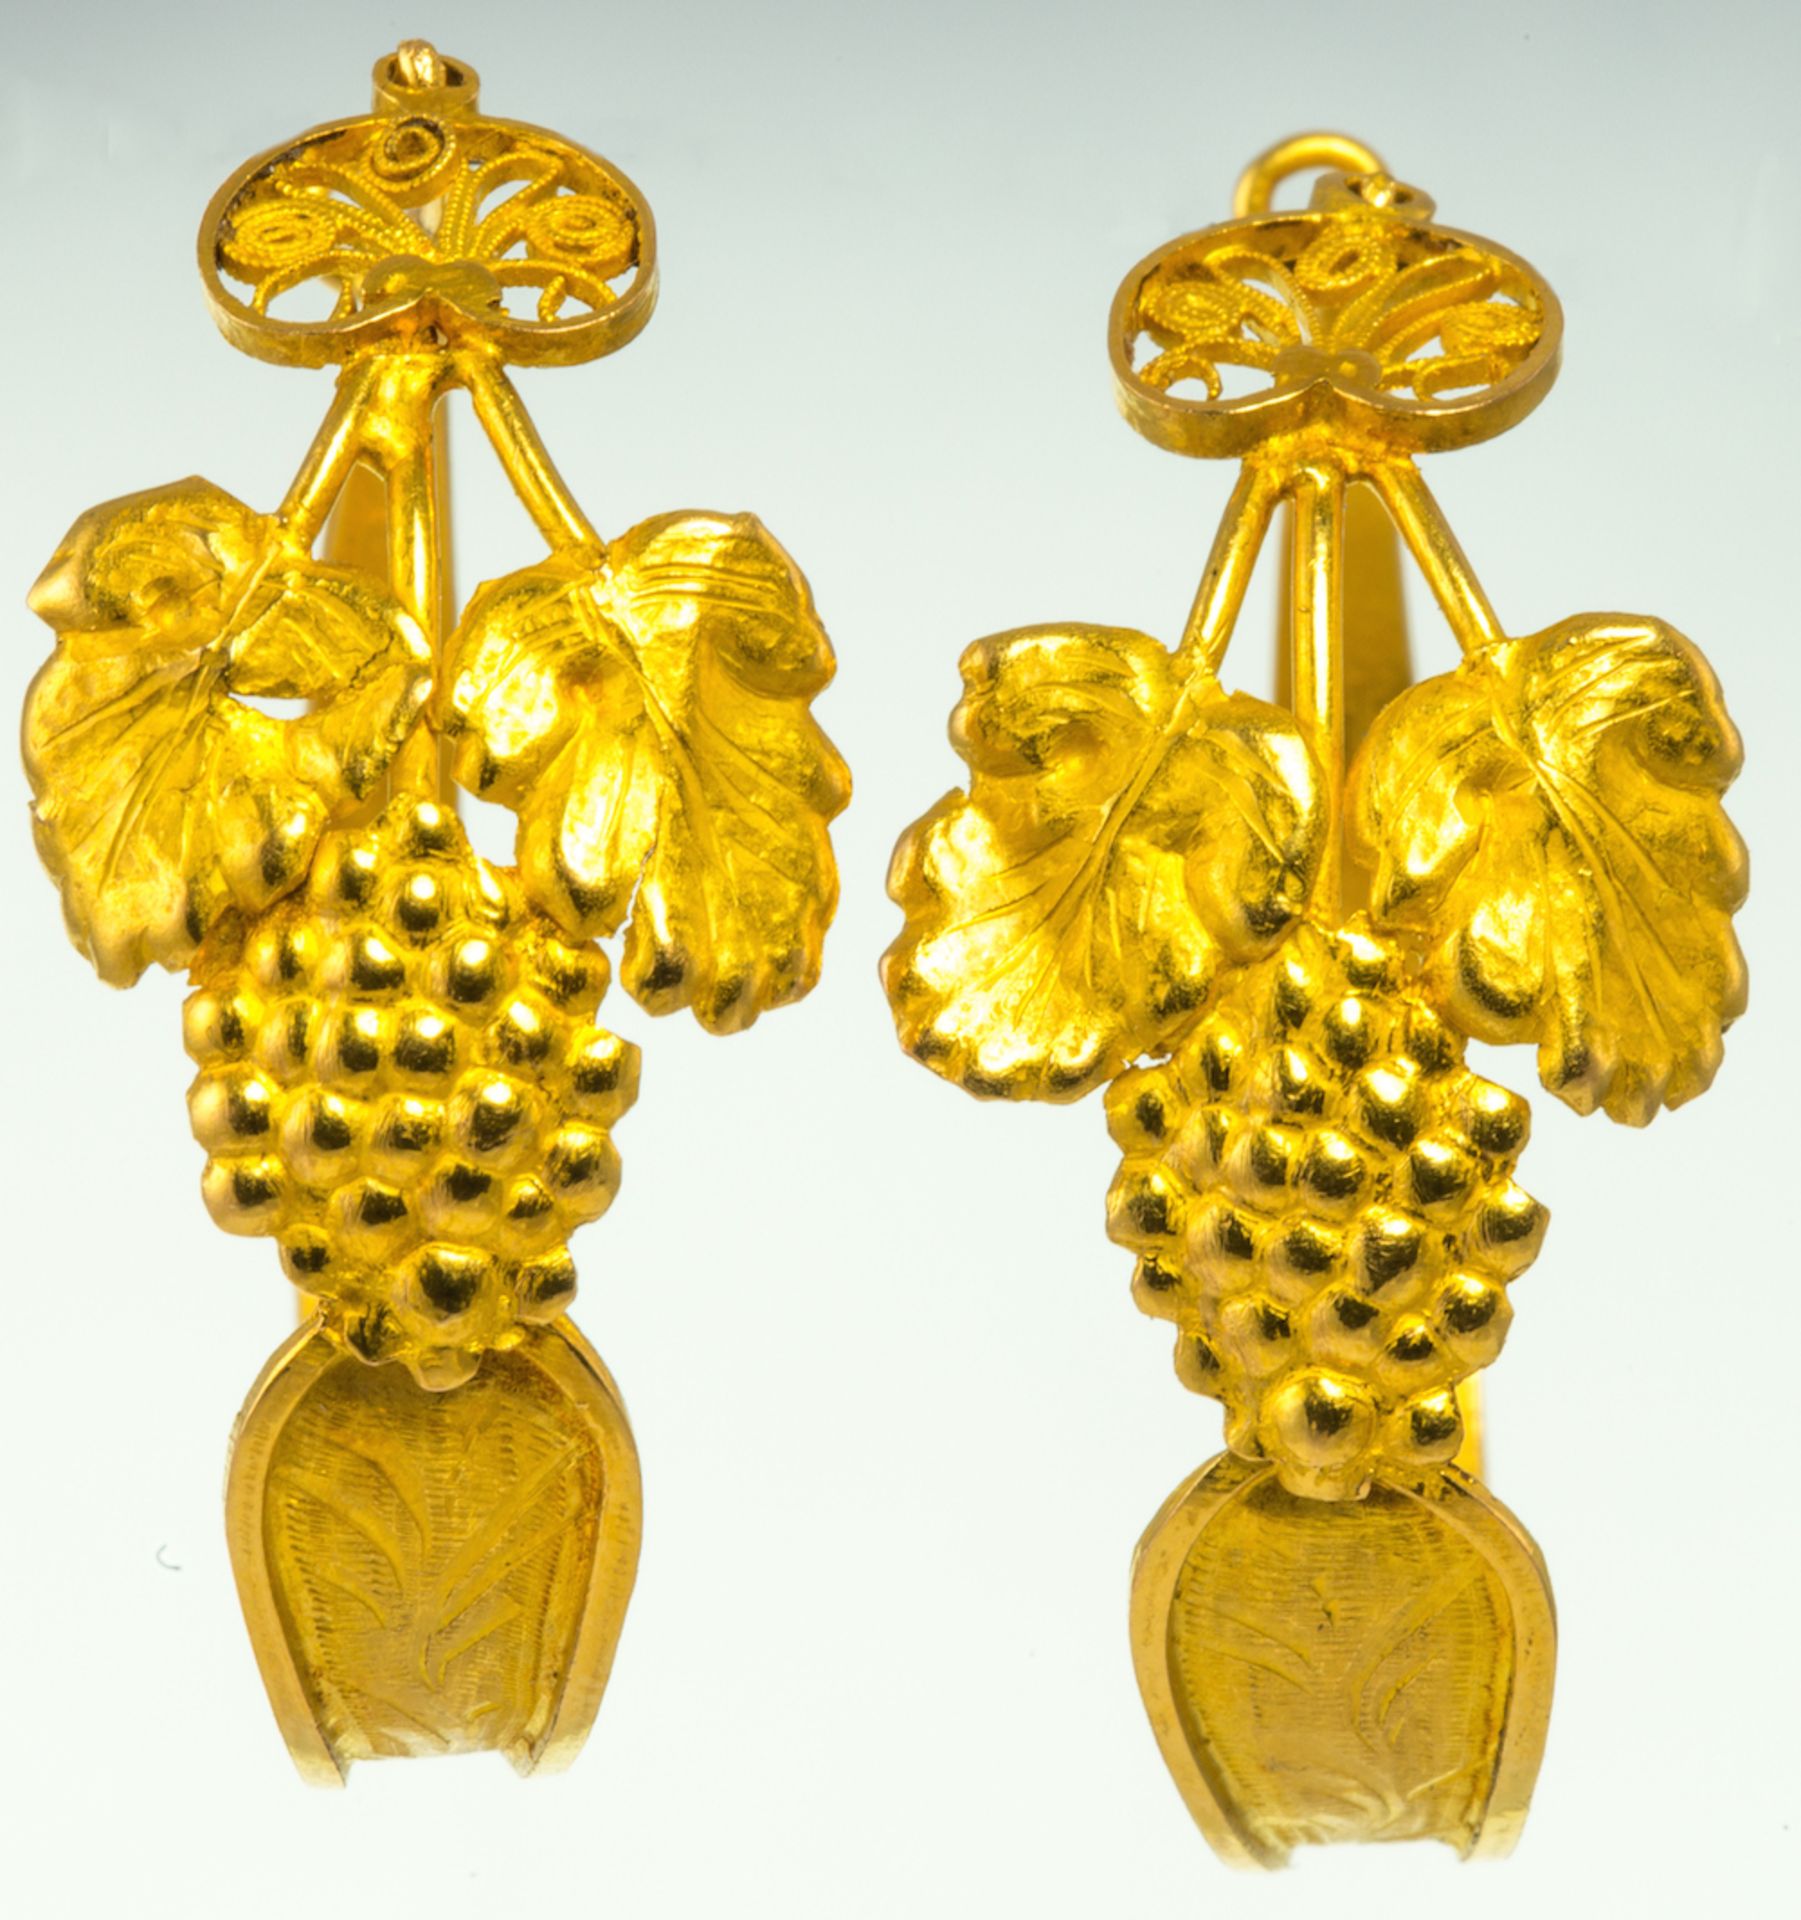 ALEXANDER MAGNUS LUNDSTROM (1803-1850)  - 18ct gold earrings in shape of grapes and heart filigree,